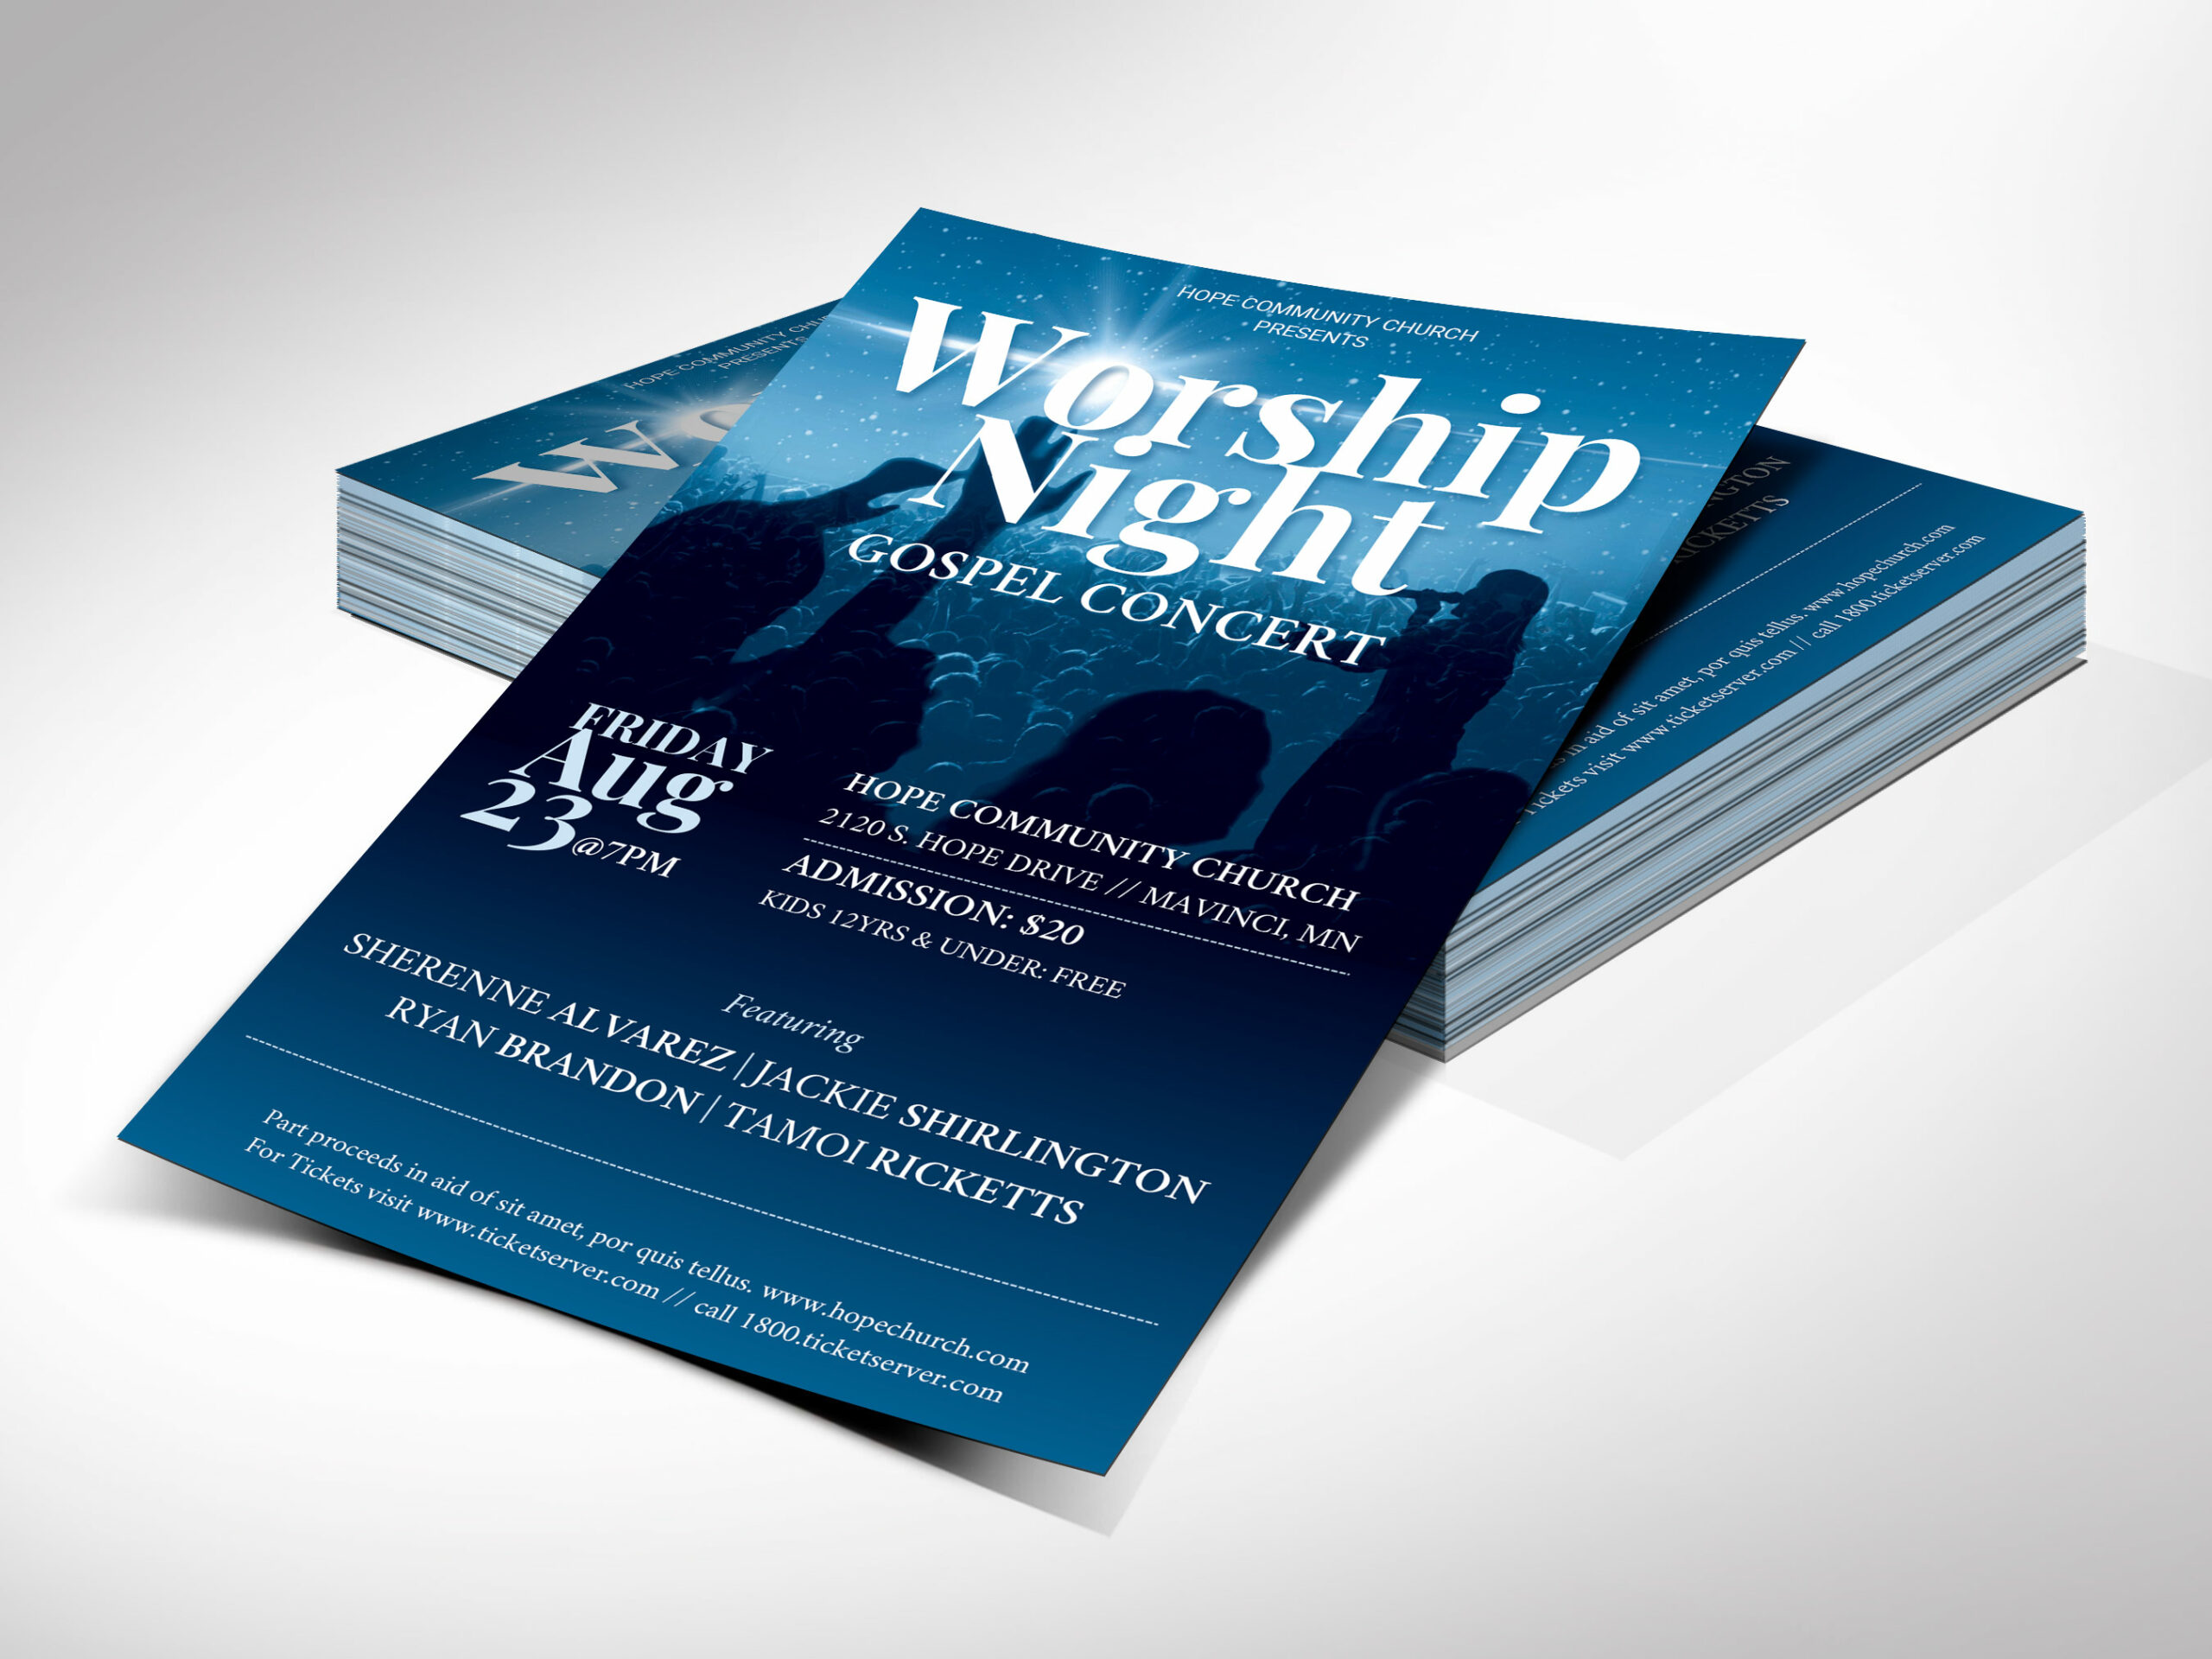 Worship Concert Flyer Template, Canva Template | Blue White, Church Concert, Social Media, Poster Template | 4 Sizes